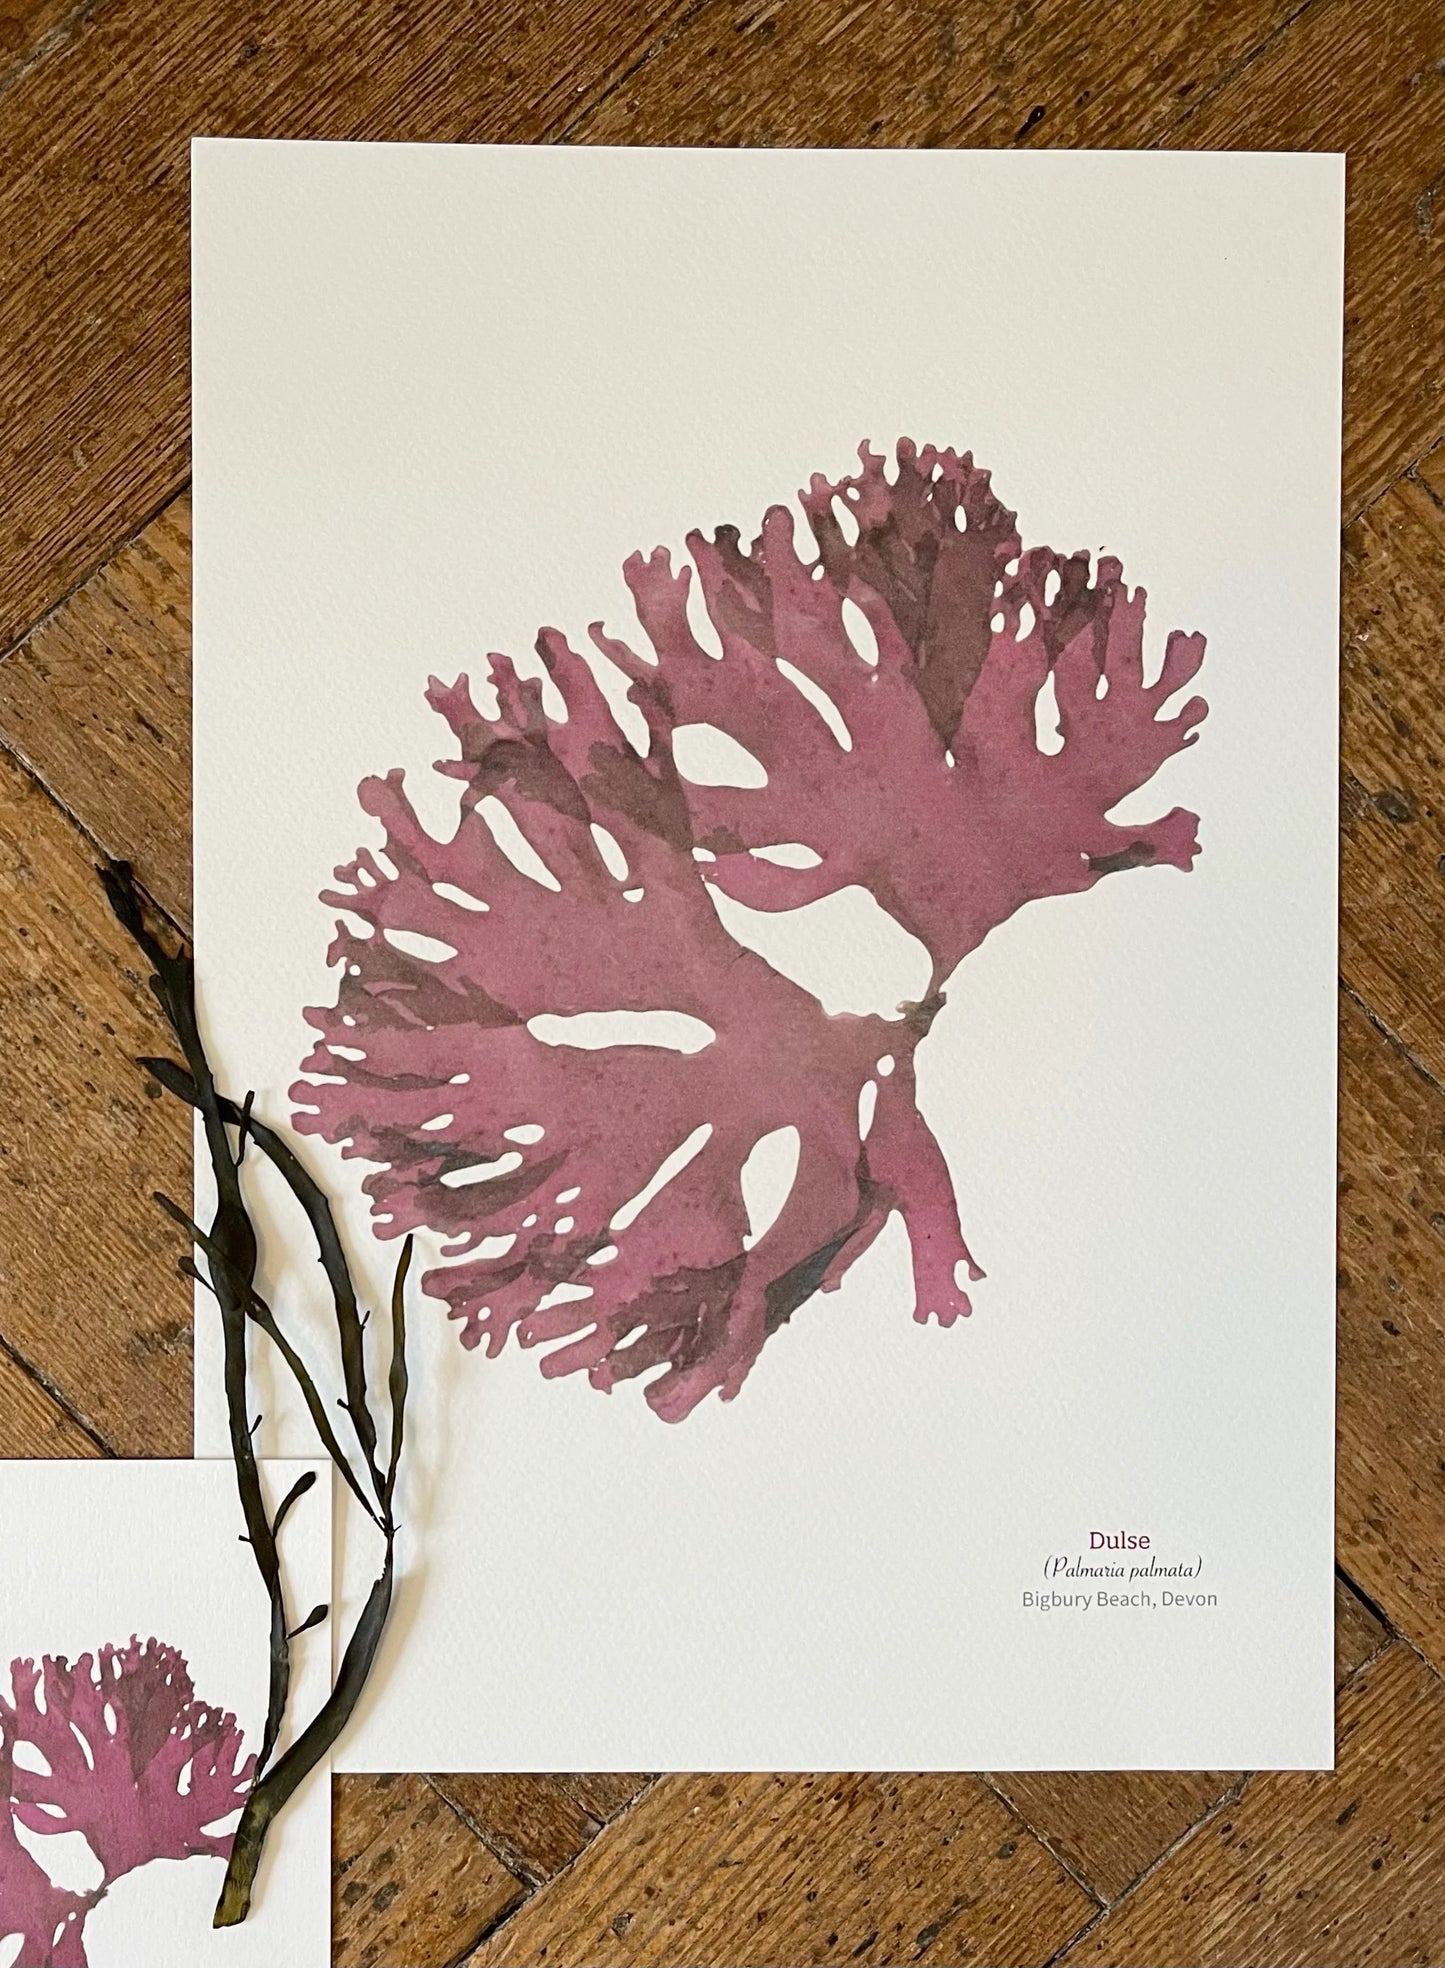 Dulse Limited Edition A4 Seaweed Print